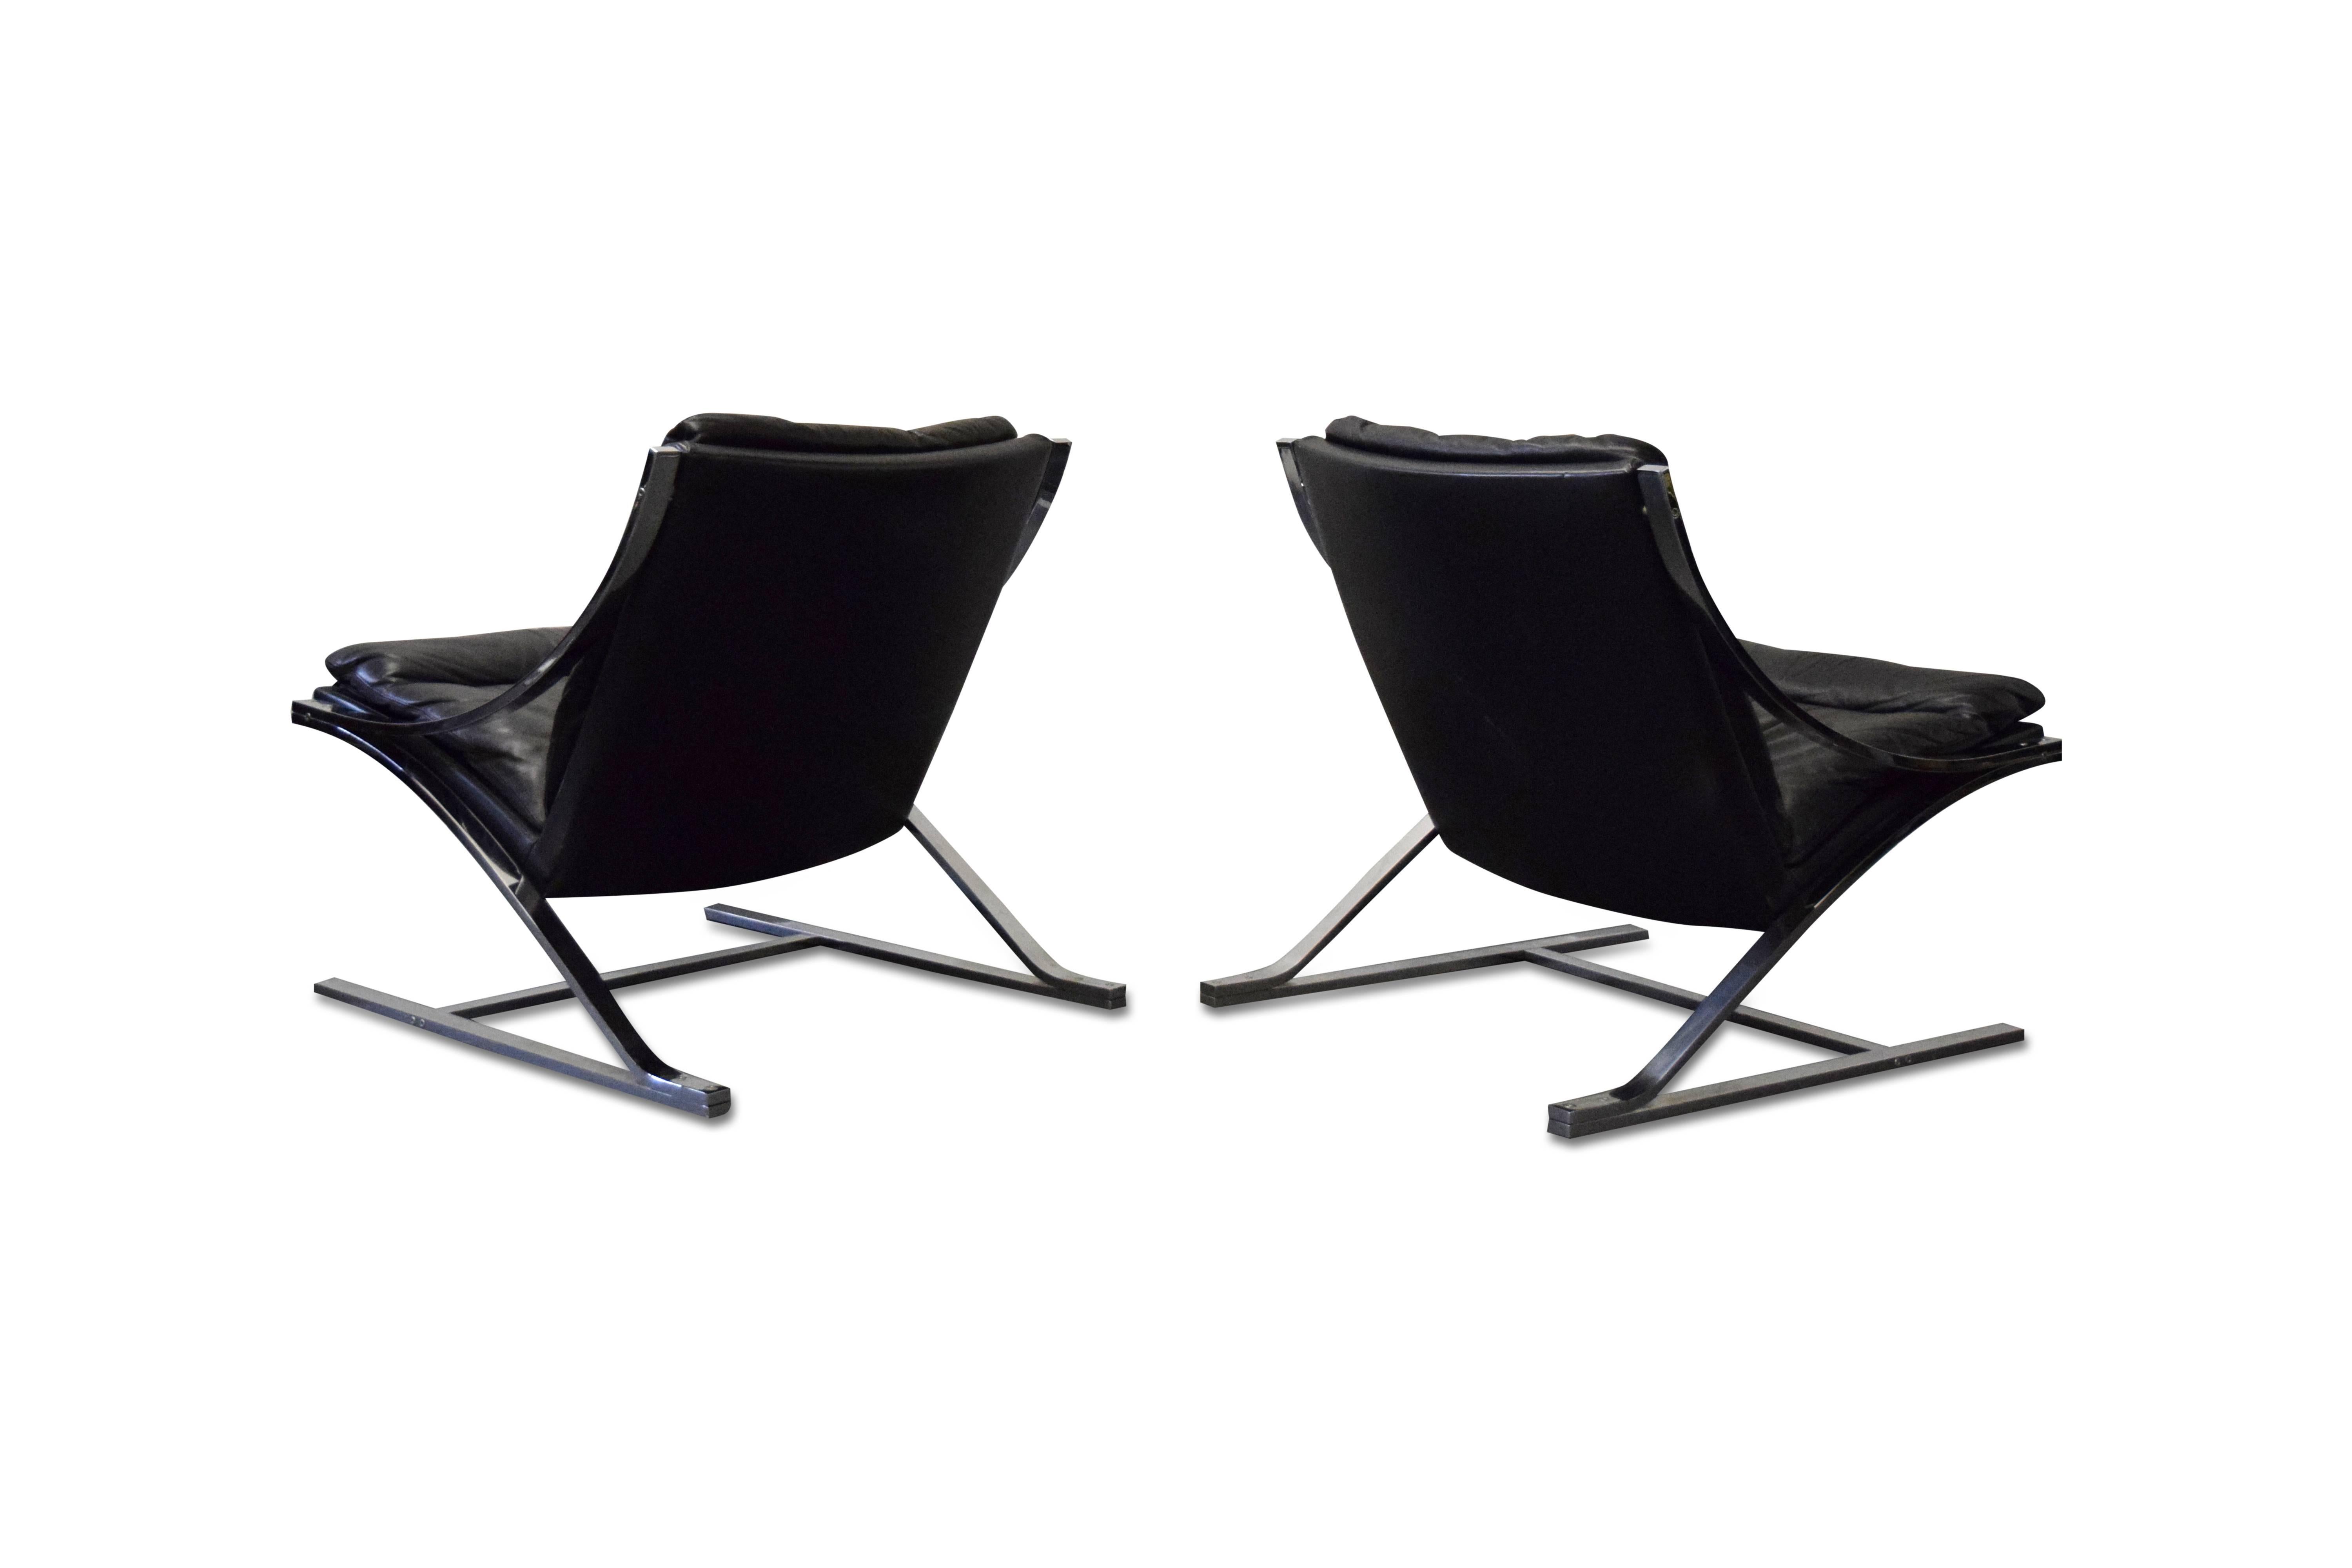 Swiss Signed Pair of Paul Tuttle 'Zeta' Lounge Chairs for Strassle For Sale